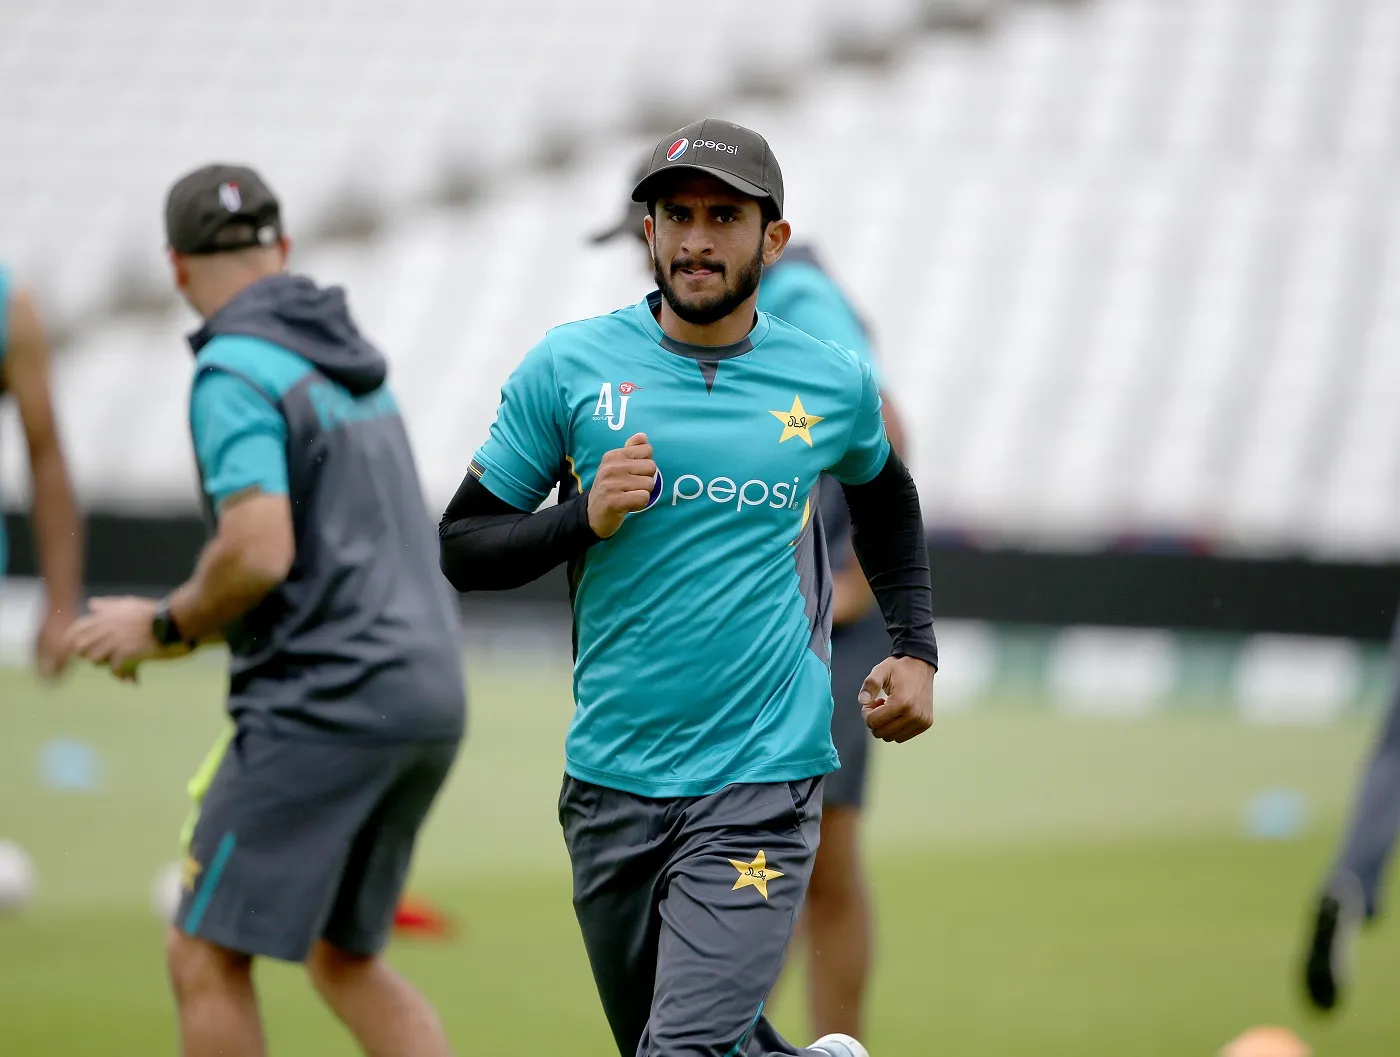 Hasan Ali friendly tussle with PCT masseur before Australia series. In a widely circulated video, Hasan Ali, a Pakistan cricketer, is seen playfully wrestling